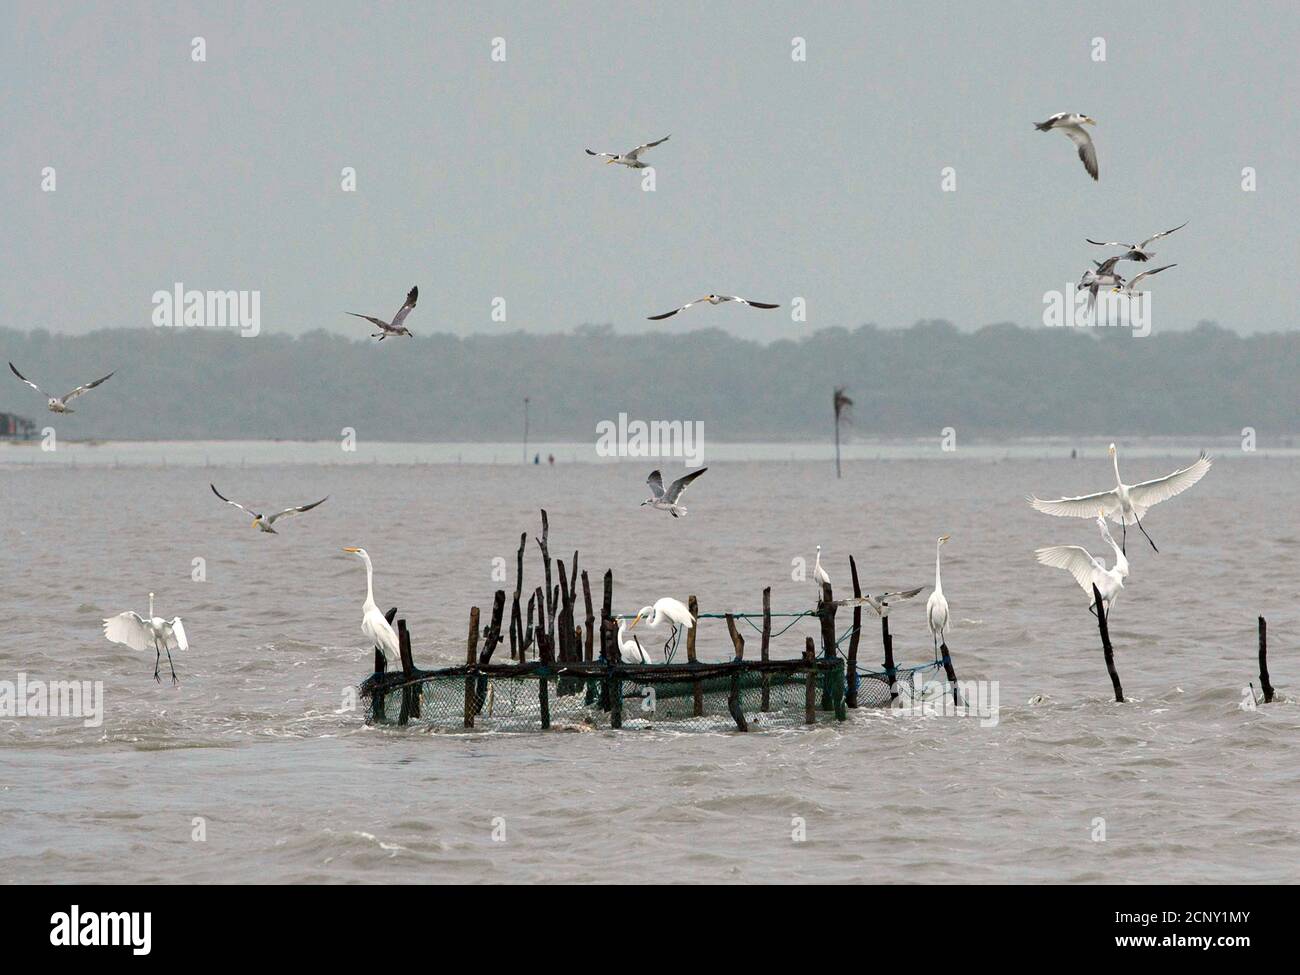 Amazon River Plume High Resolution Stock Photography and Images - Alamy